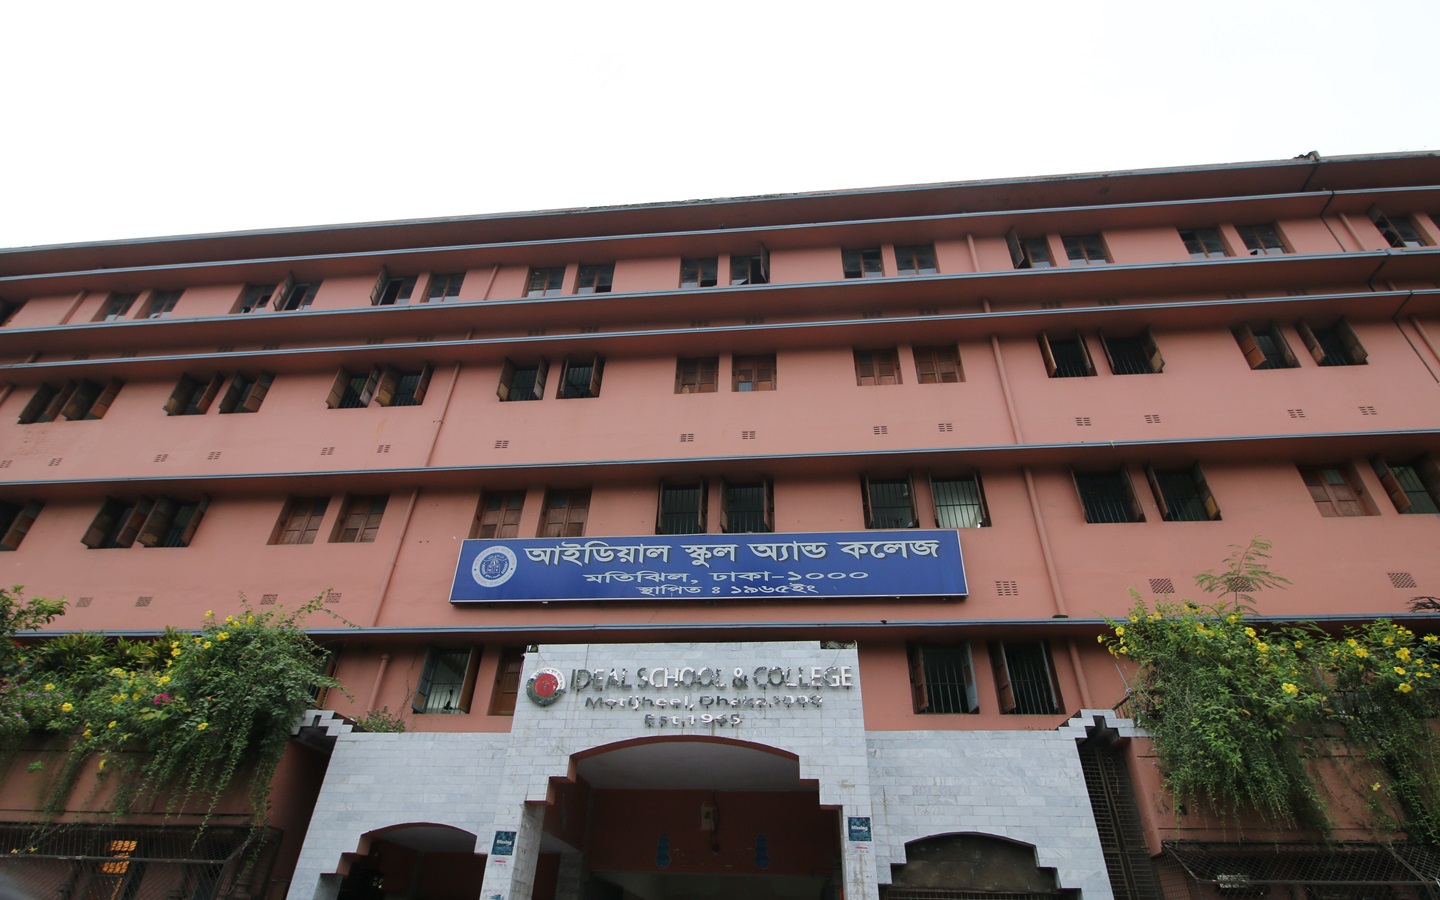 One of the most popular educational institute in Dhaka, Ideal School & College